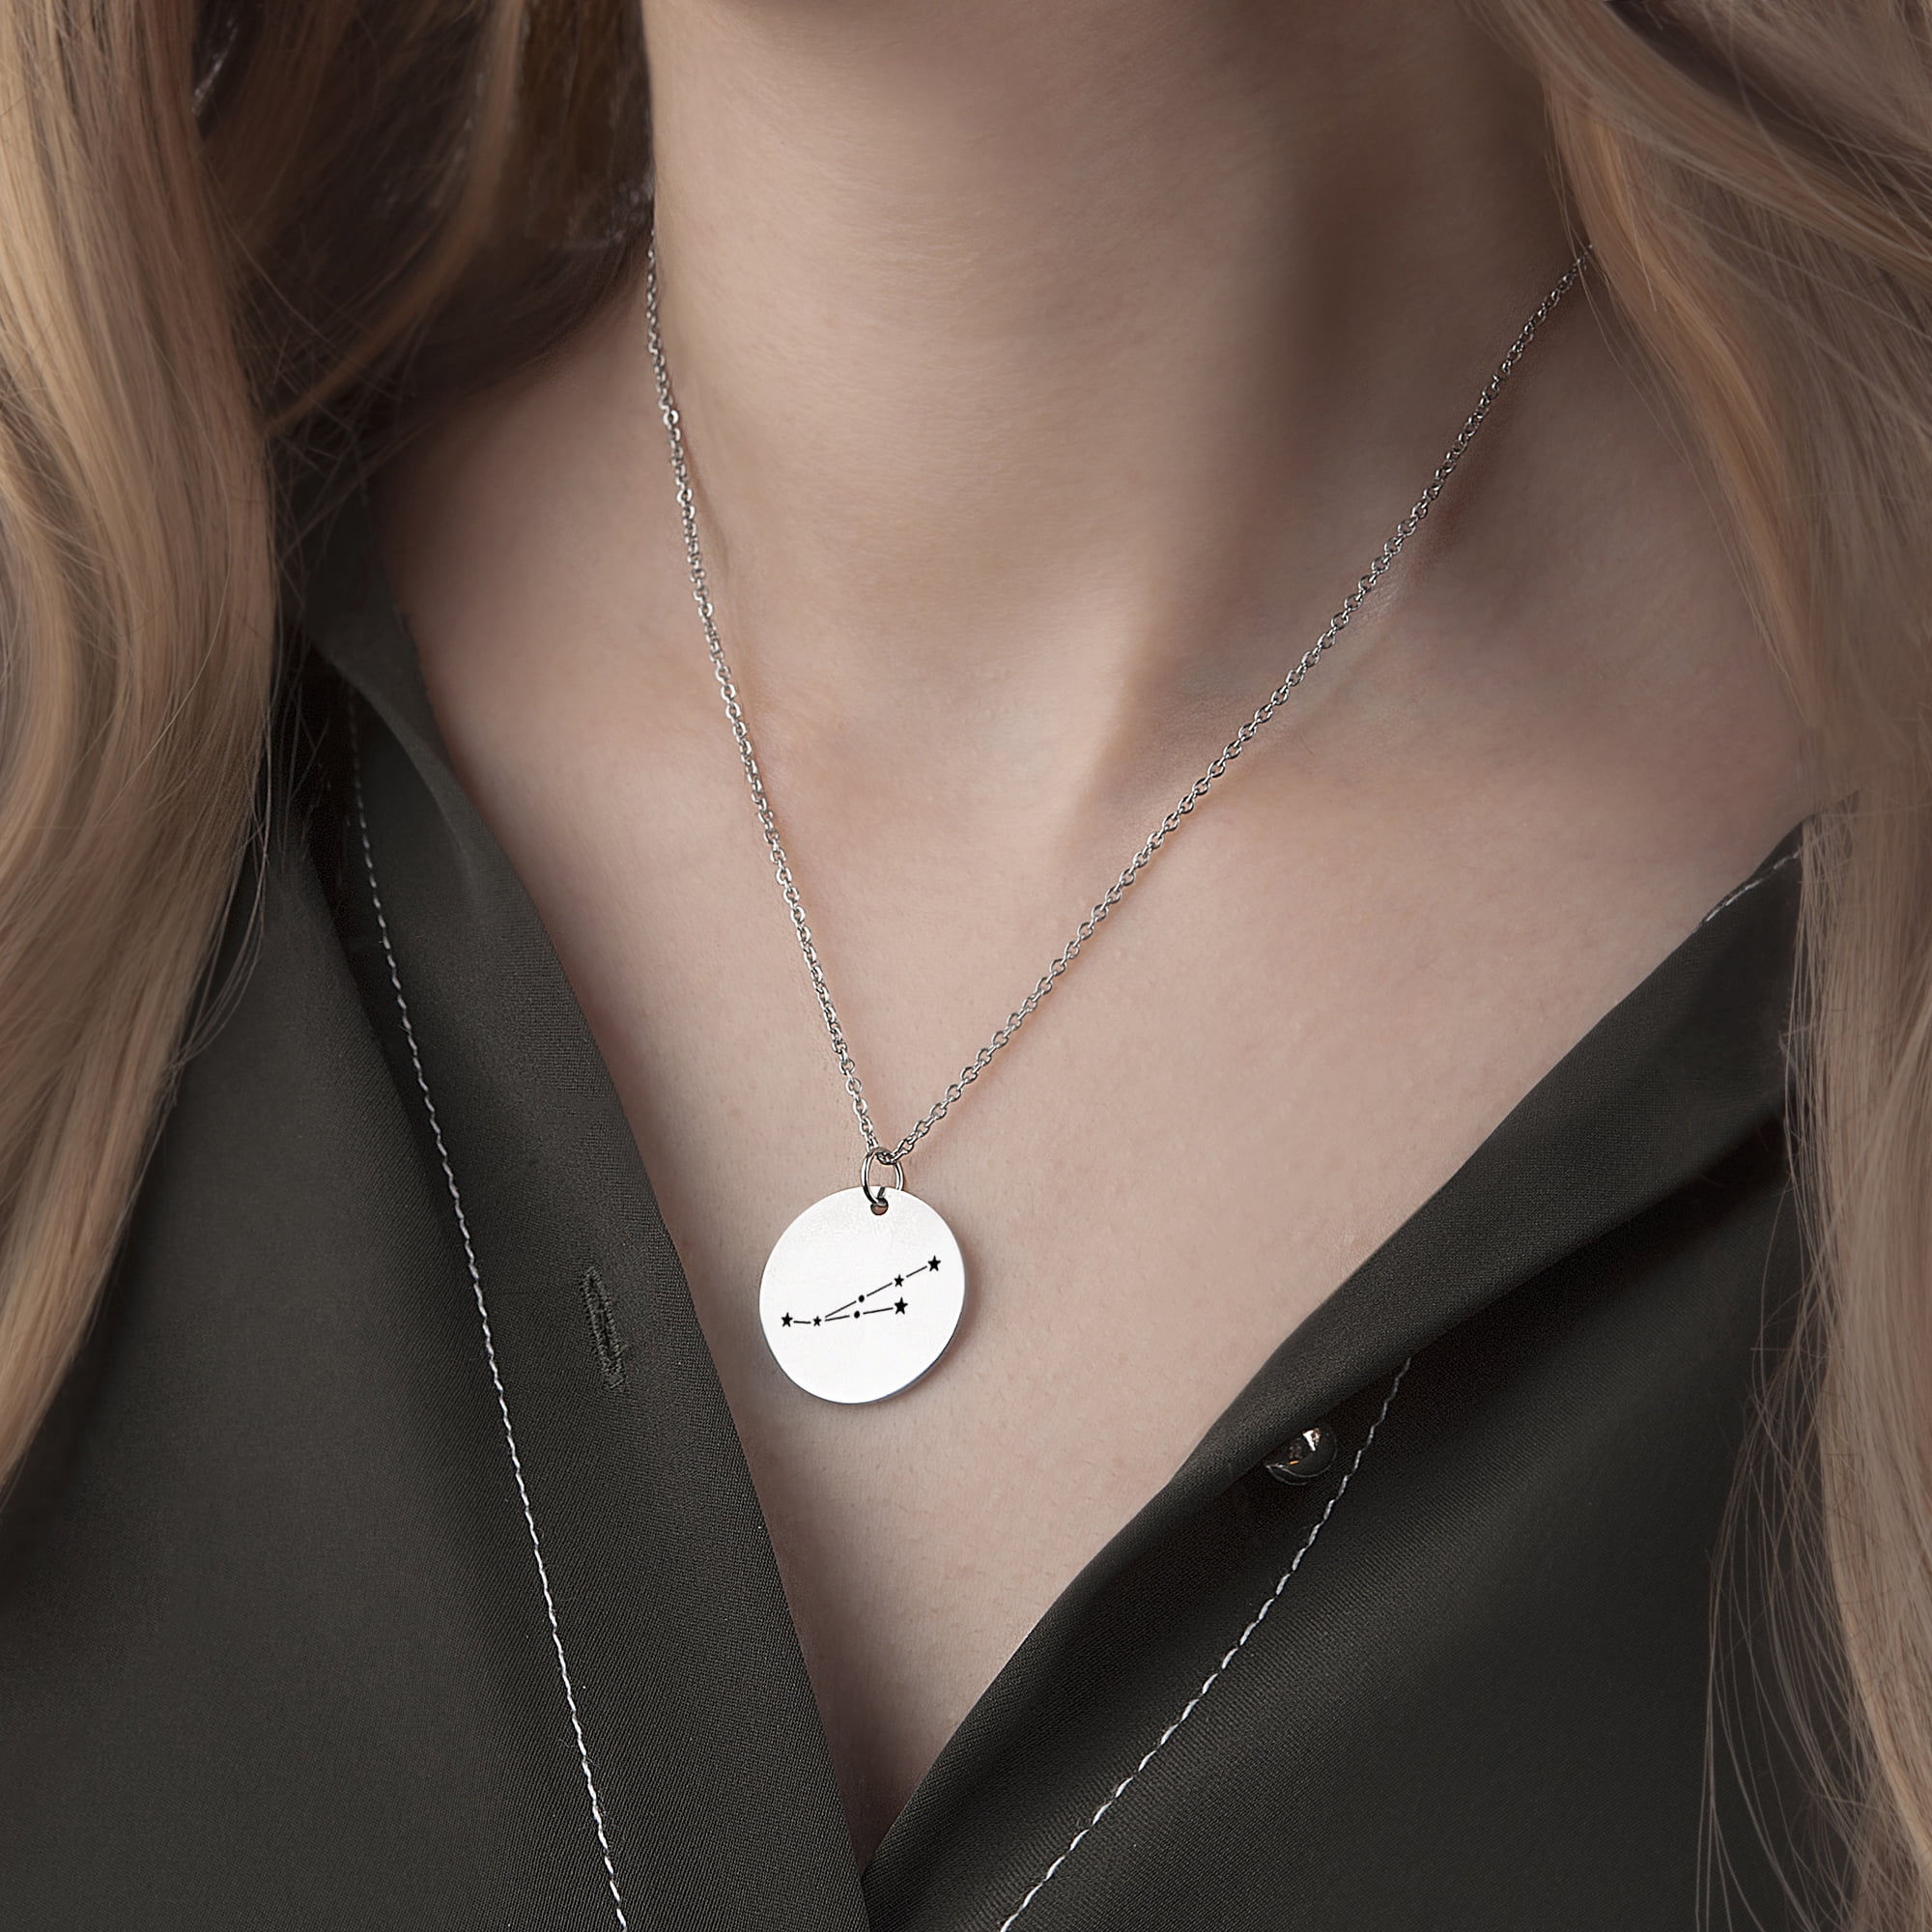 Sterling Silver Taurus Necklace Zodiac Constellation Pendant,12  Constellation Horoscope Sign Apr-May Birthday Gifts for  Women＆Girls,Astrology Constellation Zodiac Star Jewelry Necklace Chain 18